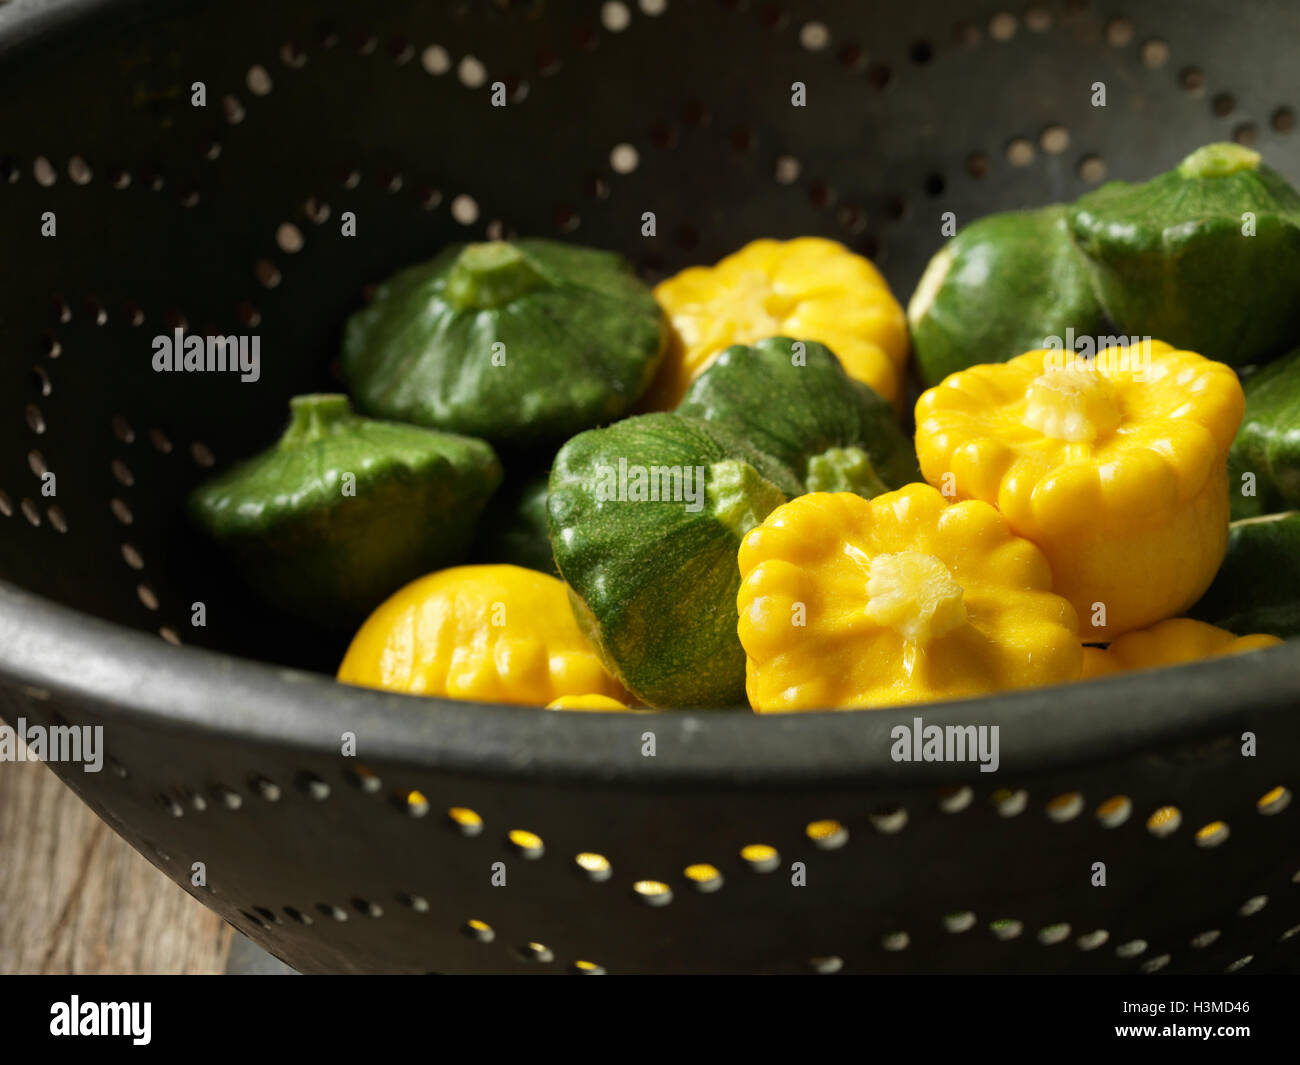 Fresh organic vegetables, patty pans yellow and green in metal colander Stock Photo